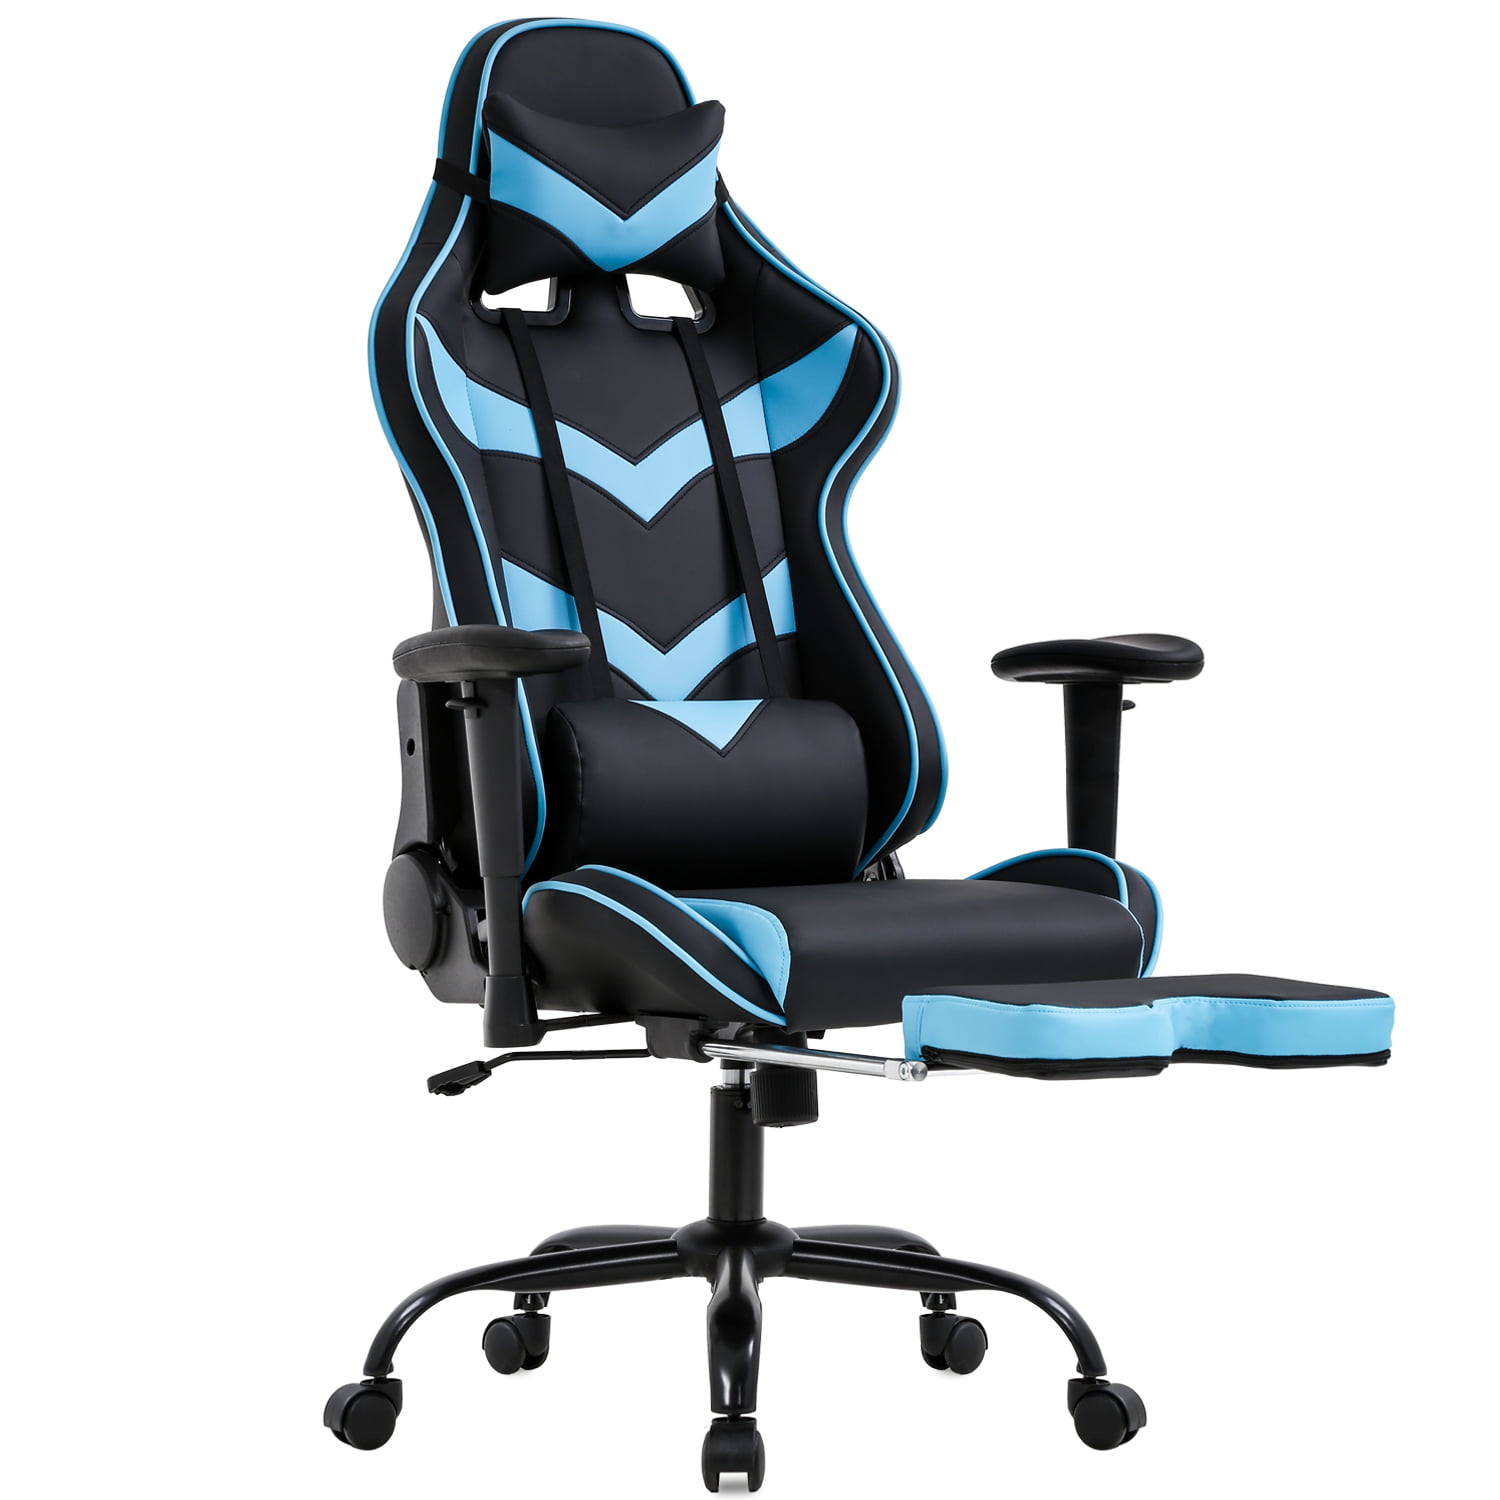 Gaming Chair Computer Chair High Back Office Chair Ergonomic Desk Chair PC Racing Chair with Massage & Headrest Lumbar Support PU Leather Task Chair Adjustable Height Swivel Executive Chair,Black